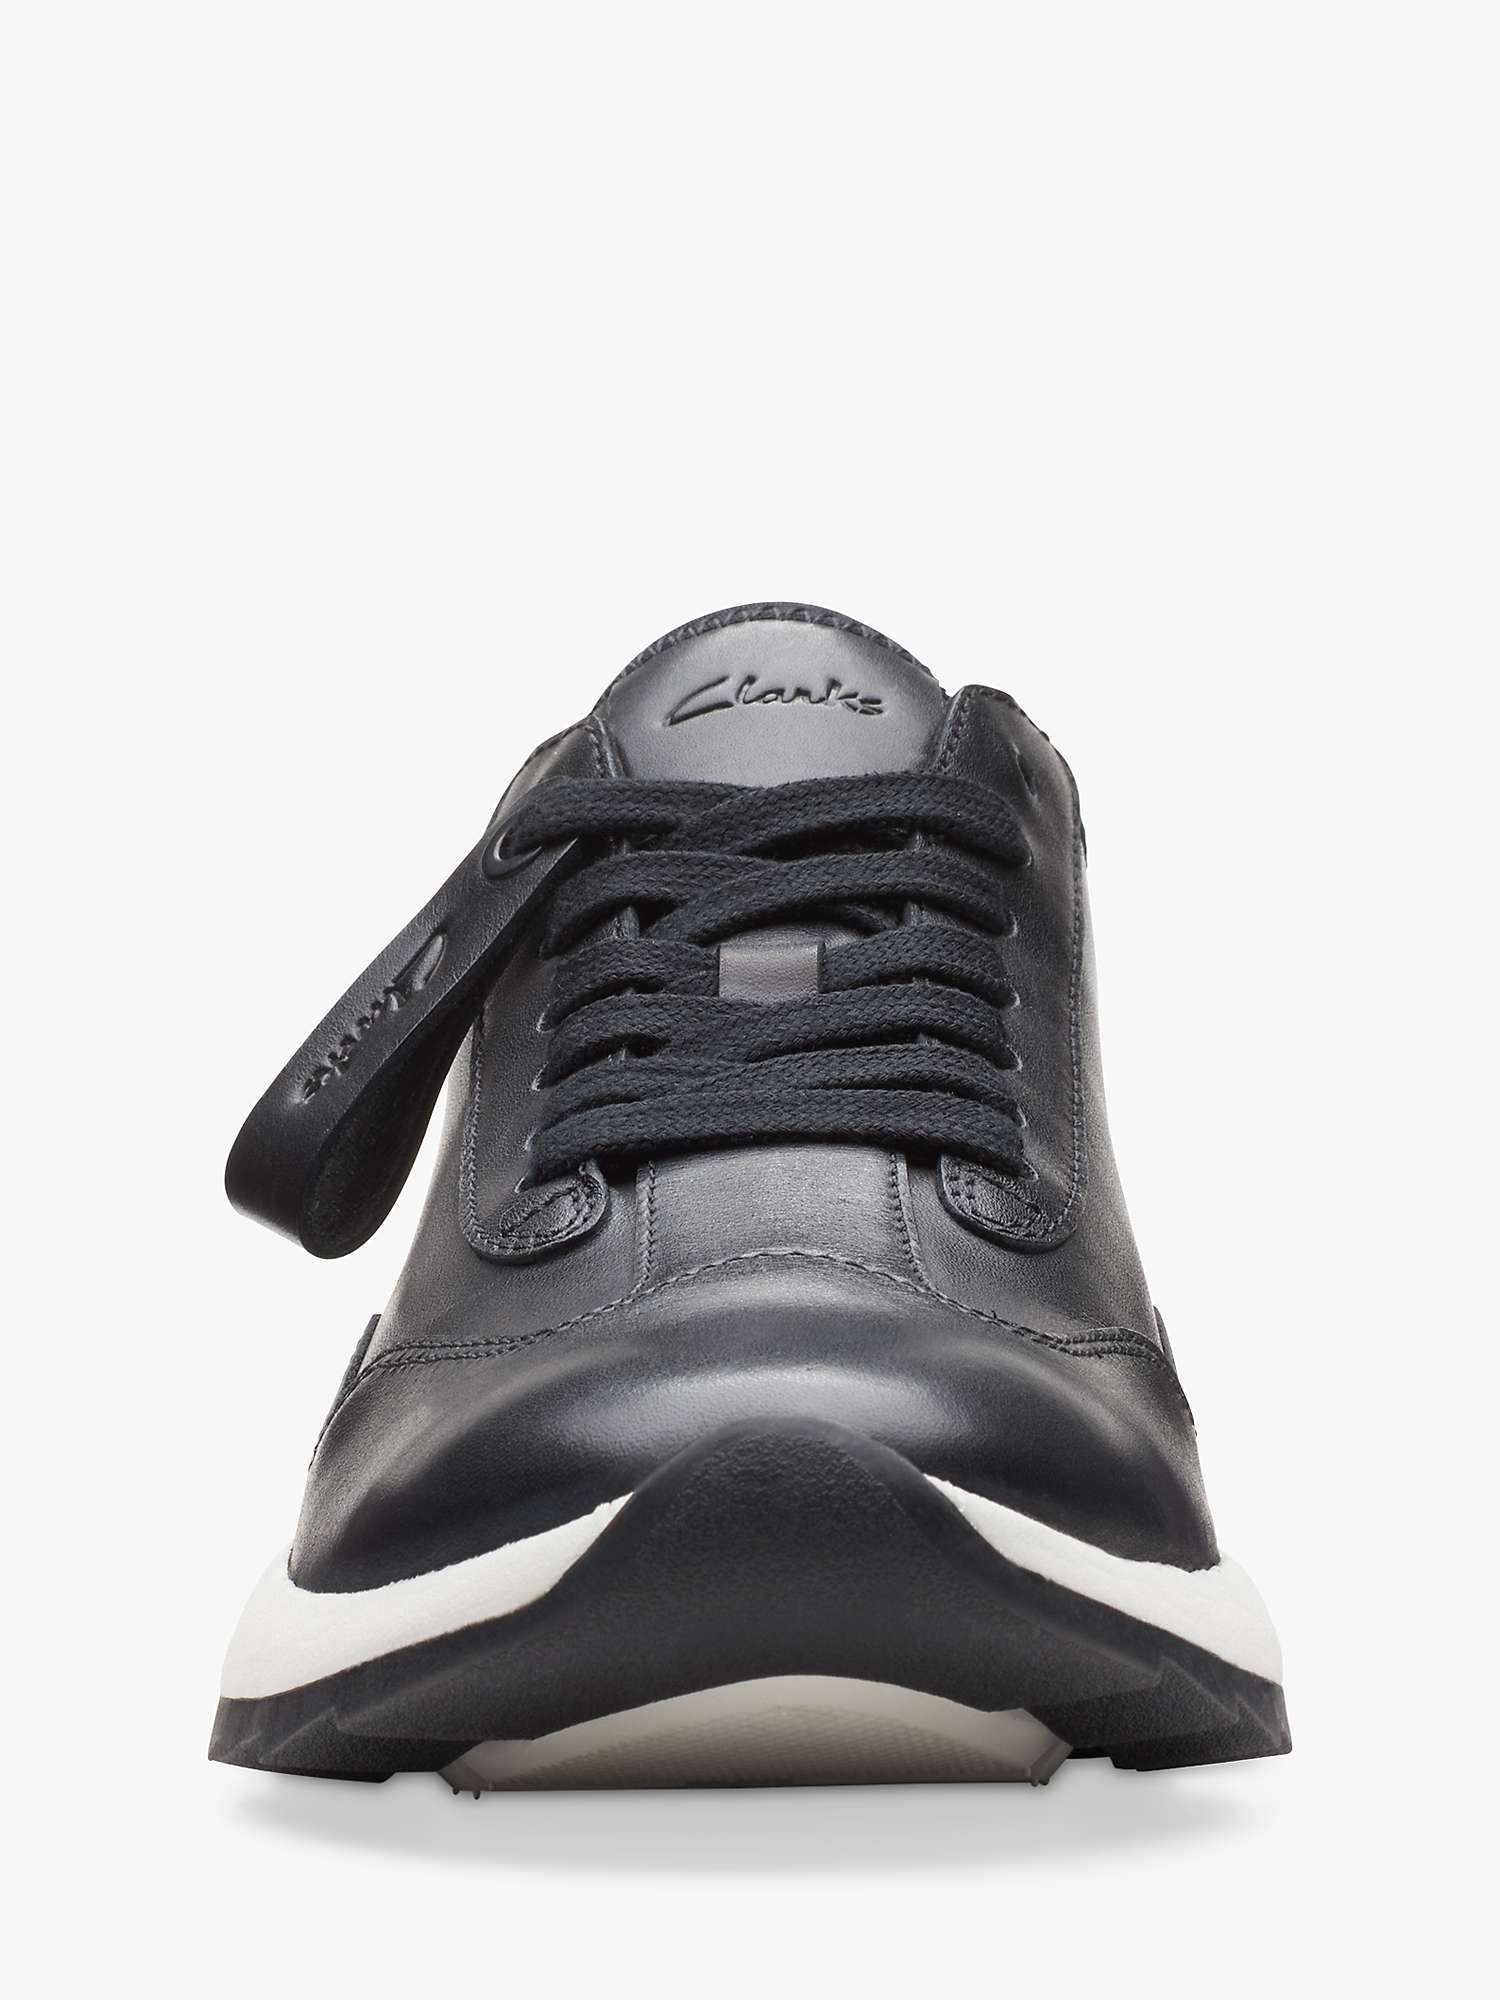 Clarks DashLite Lo Leather Trainers, Black at John Lewis & Partners